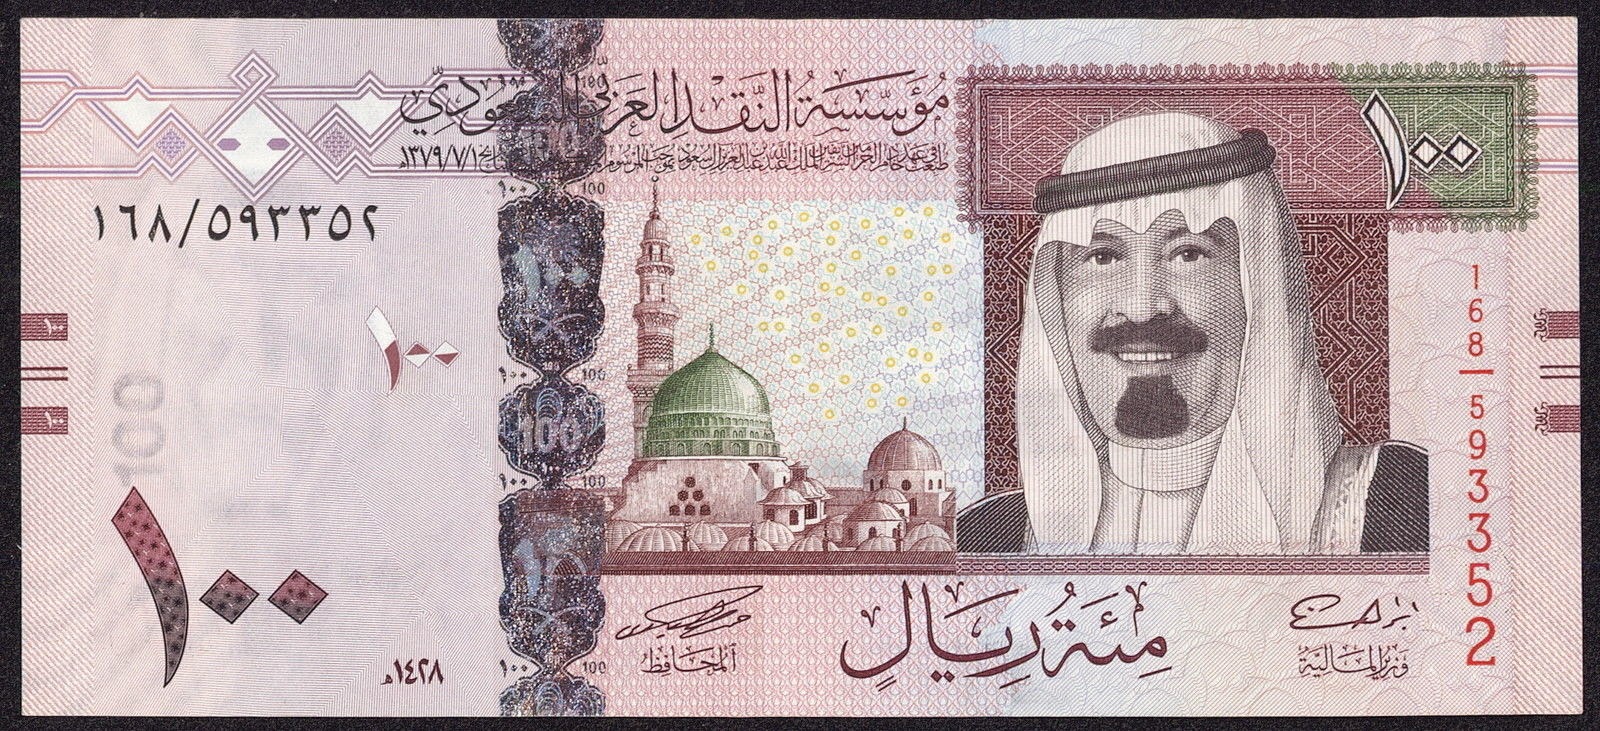 The Price Of The Saudi Riyal Today Friday 24 1 2020 In Different